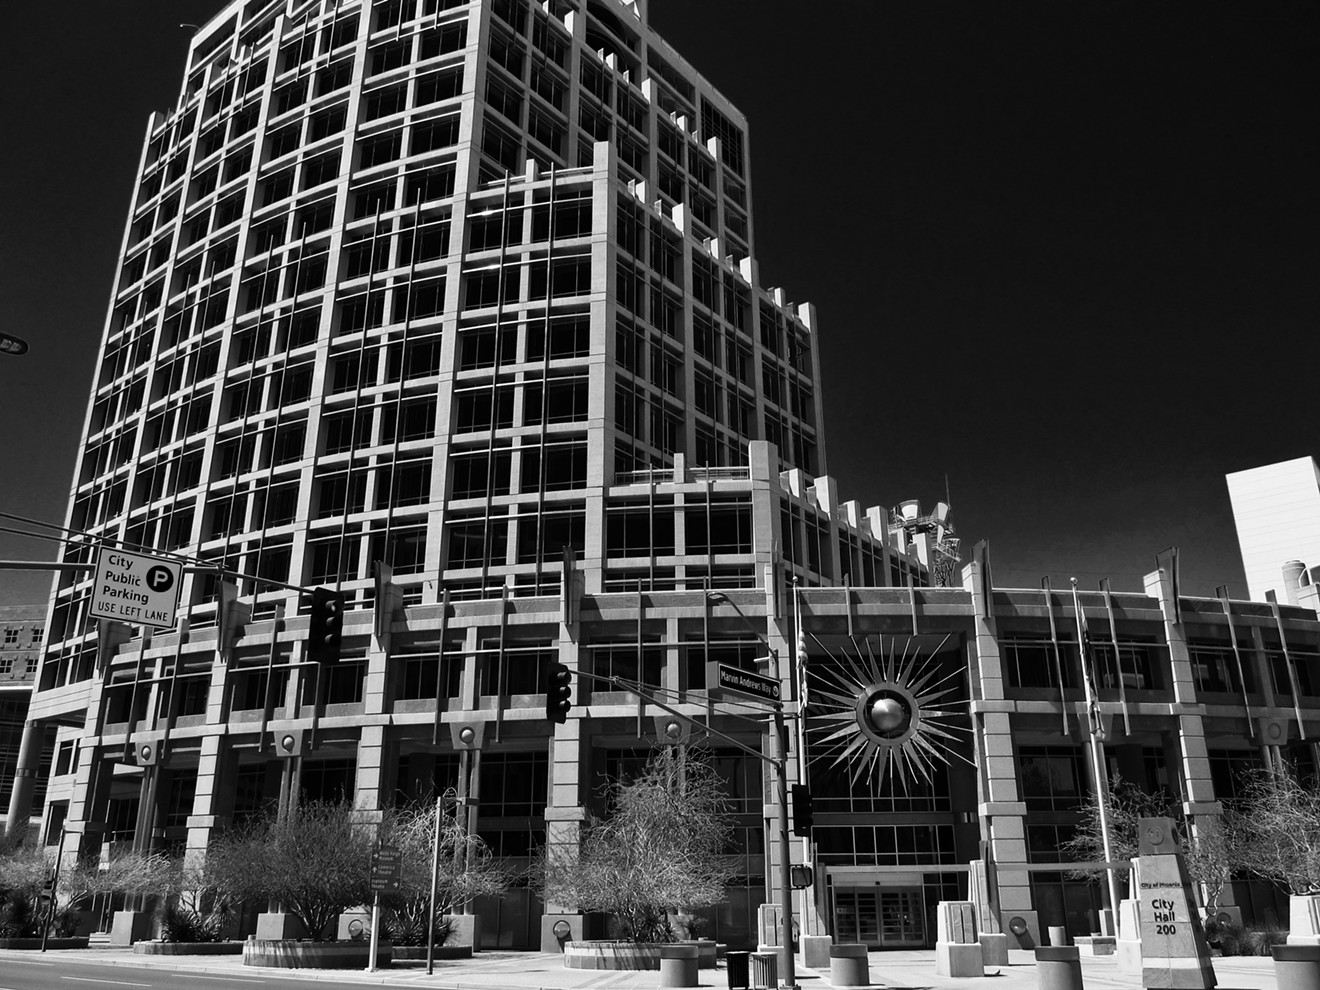 Phoenix City Hall. The city's elected leaders have been consumed by a fight over light rail and an unprecedented failure of the budget in a final vote ever since the former mayor resigned.